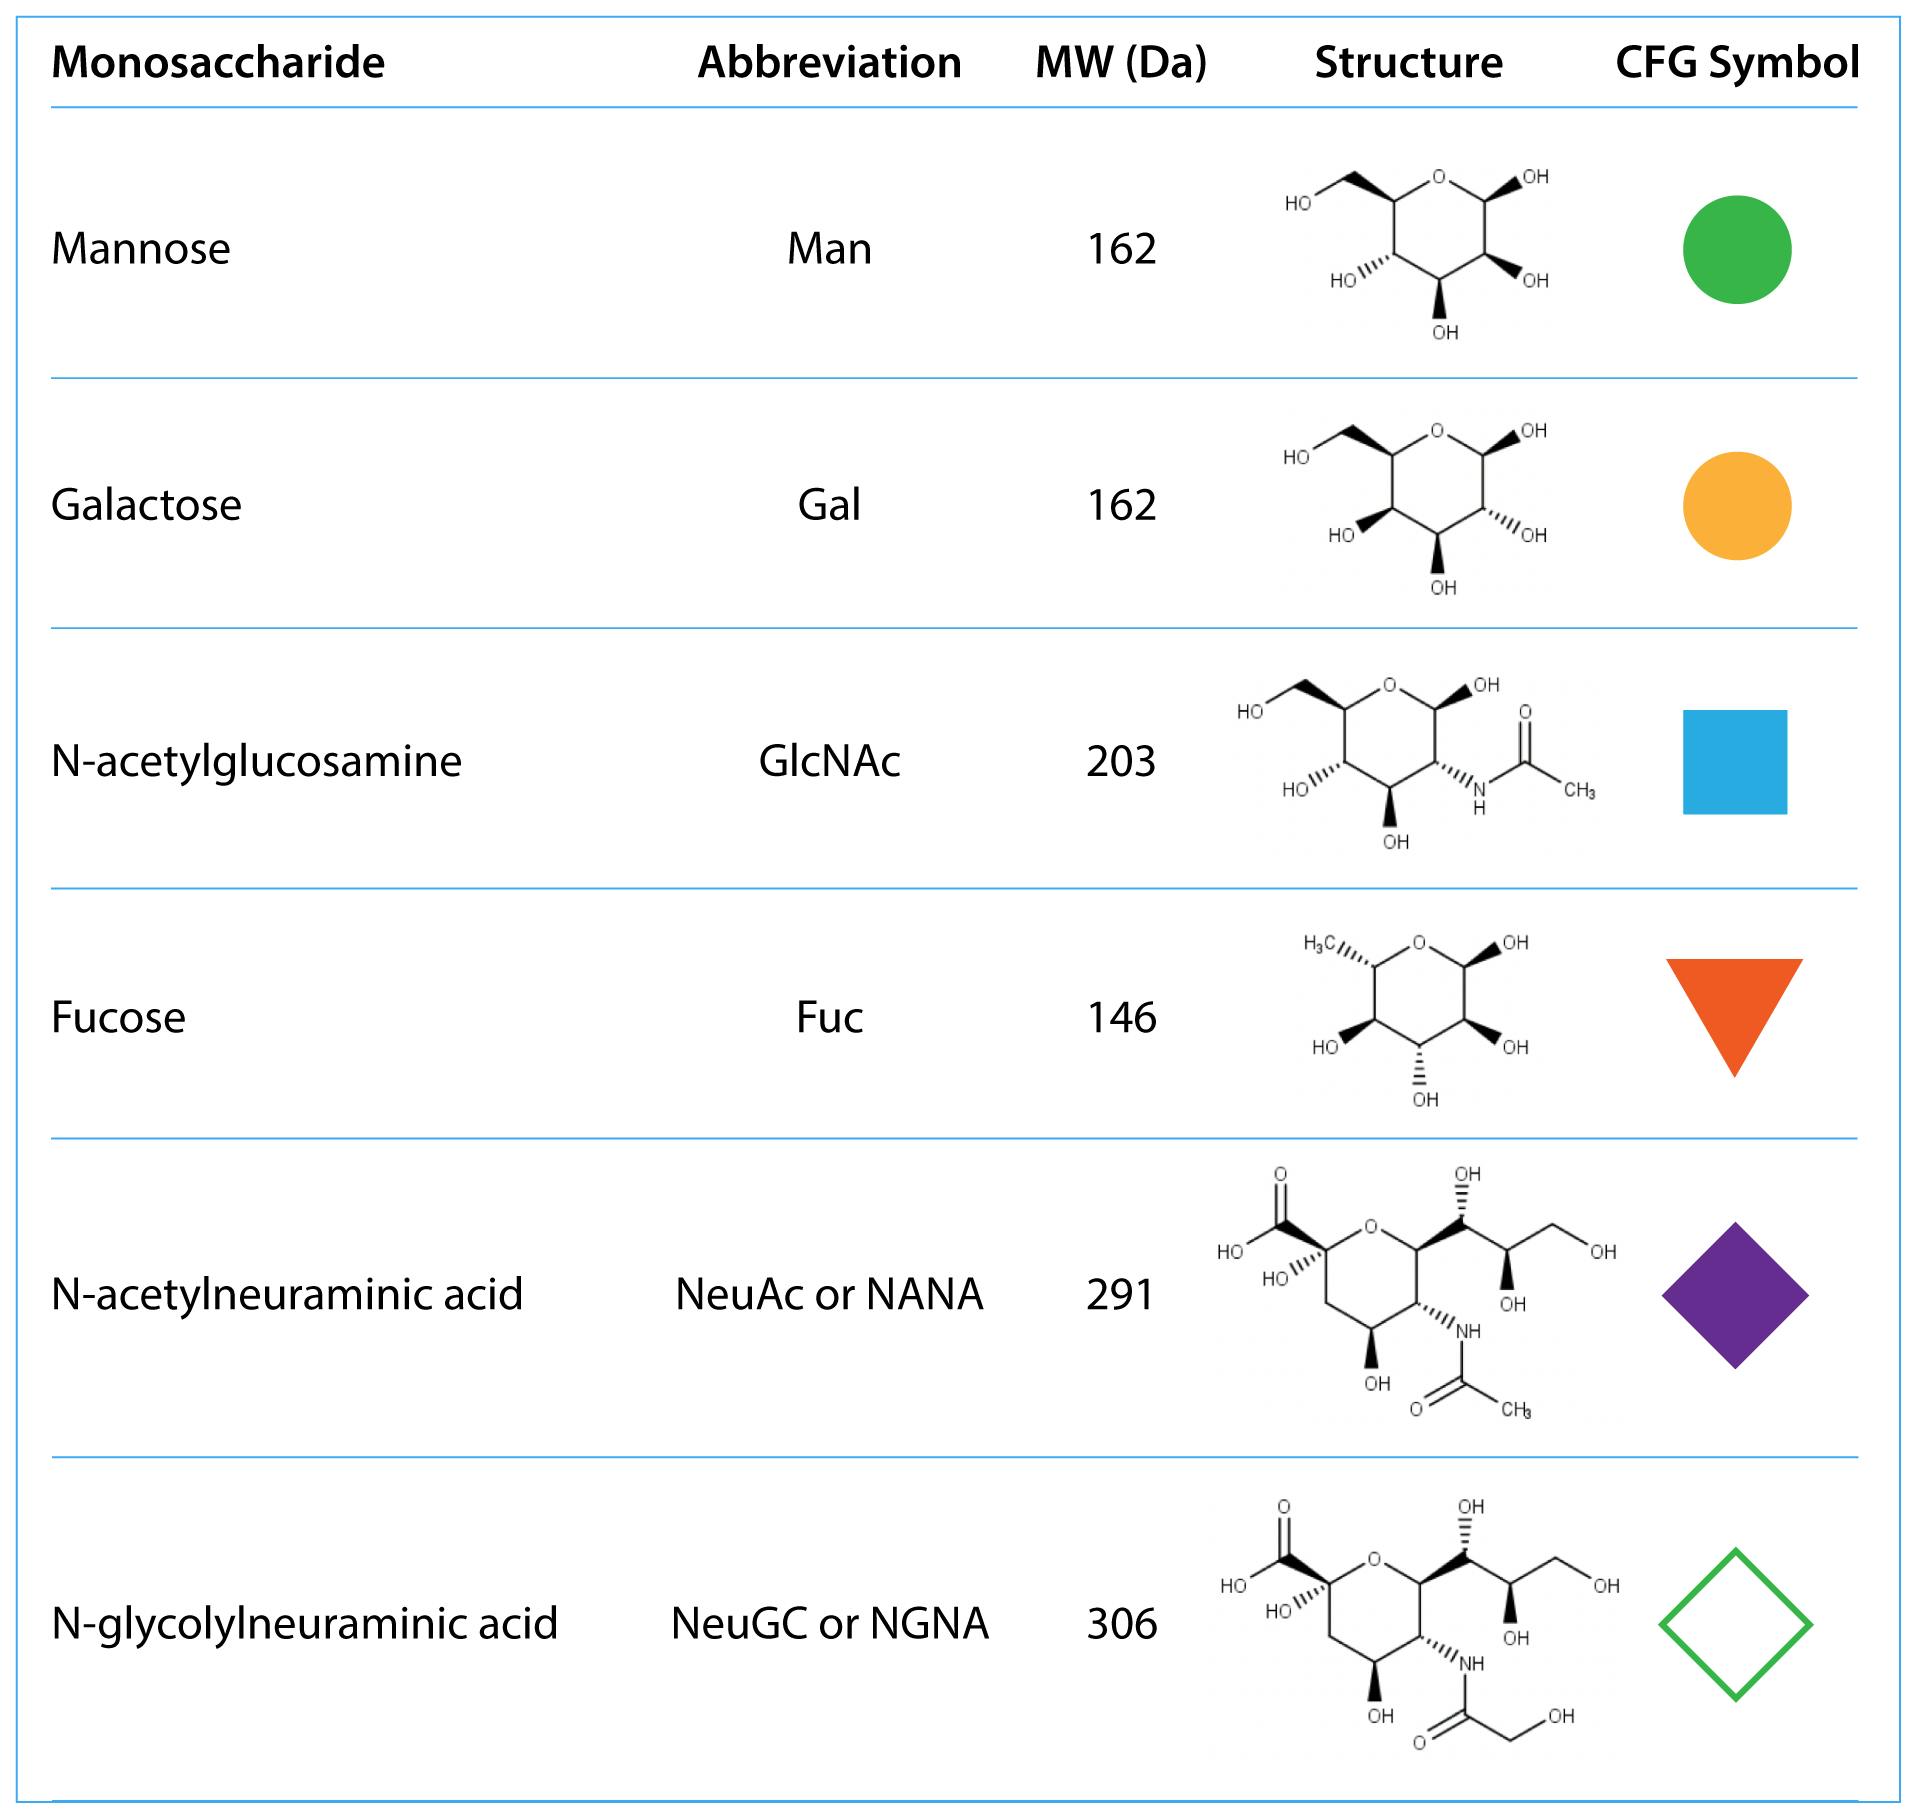 Common monosaccharides found in mAbs. CFG stands for Consortium of Functional Glycomics